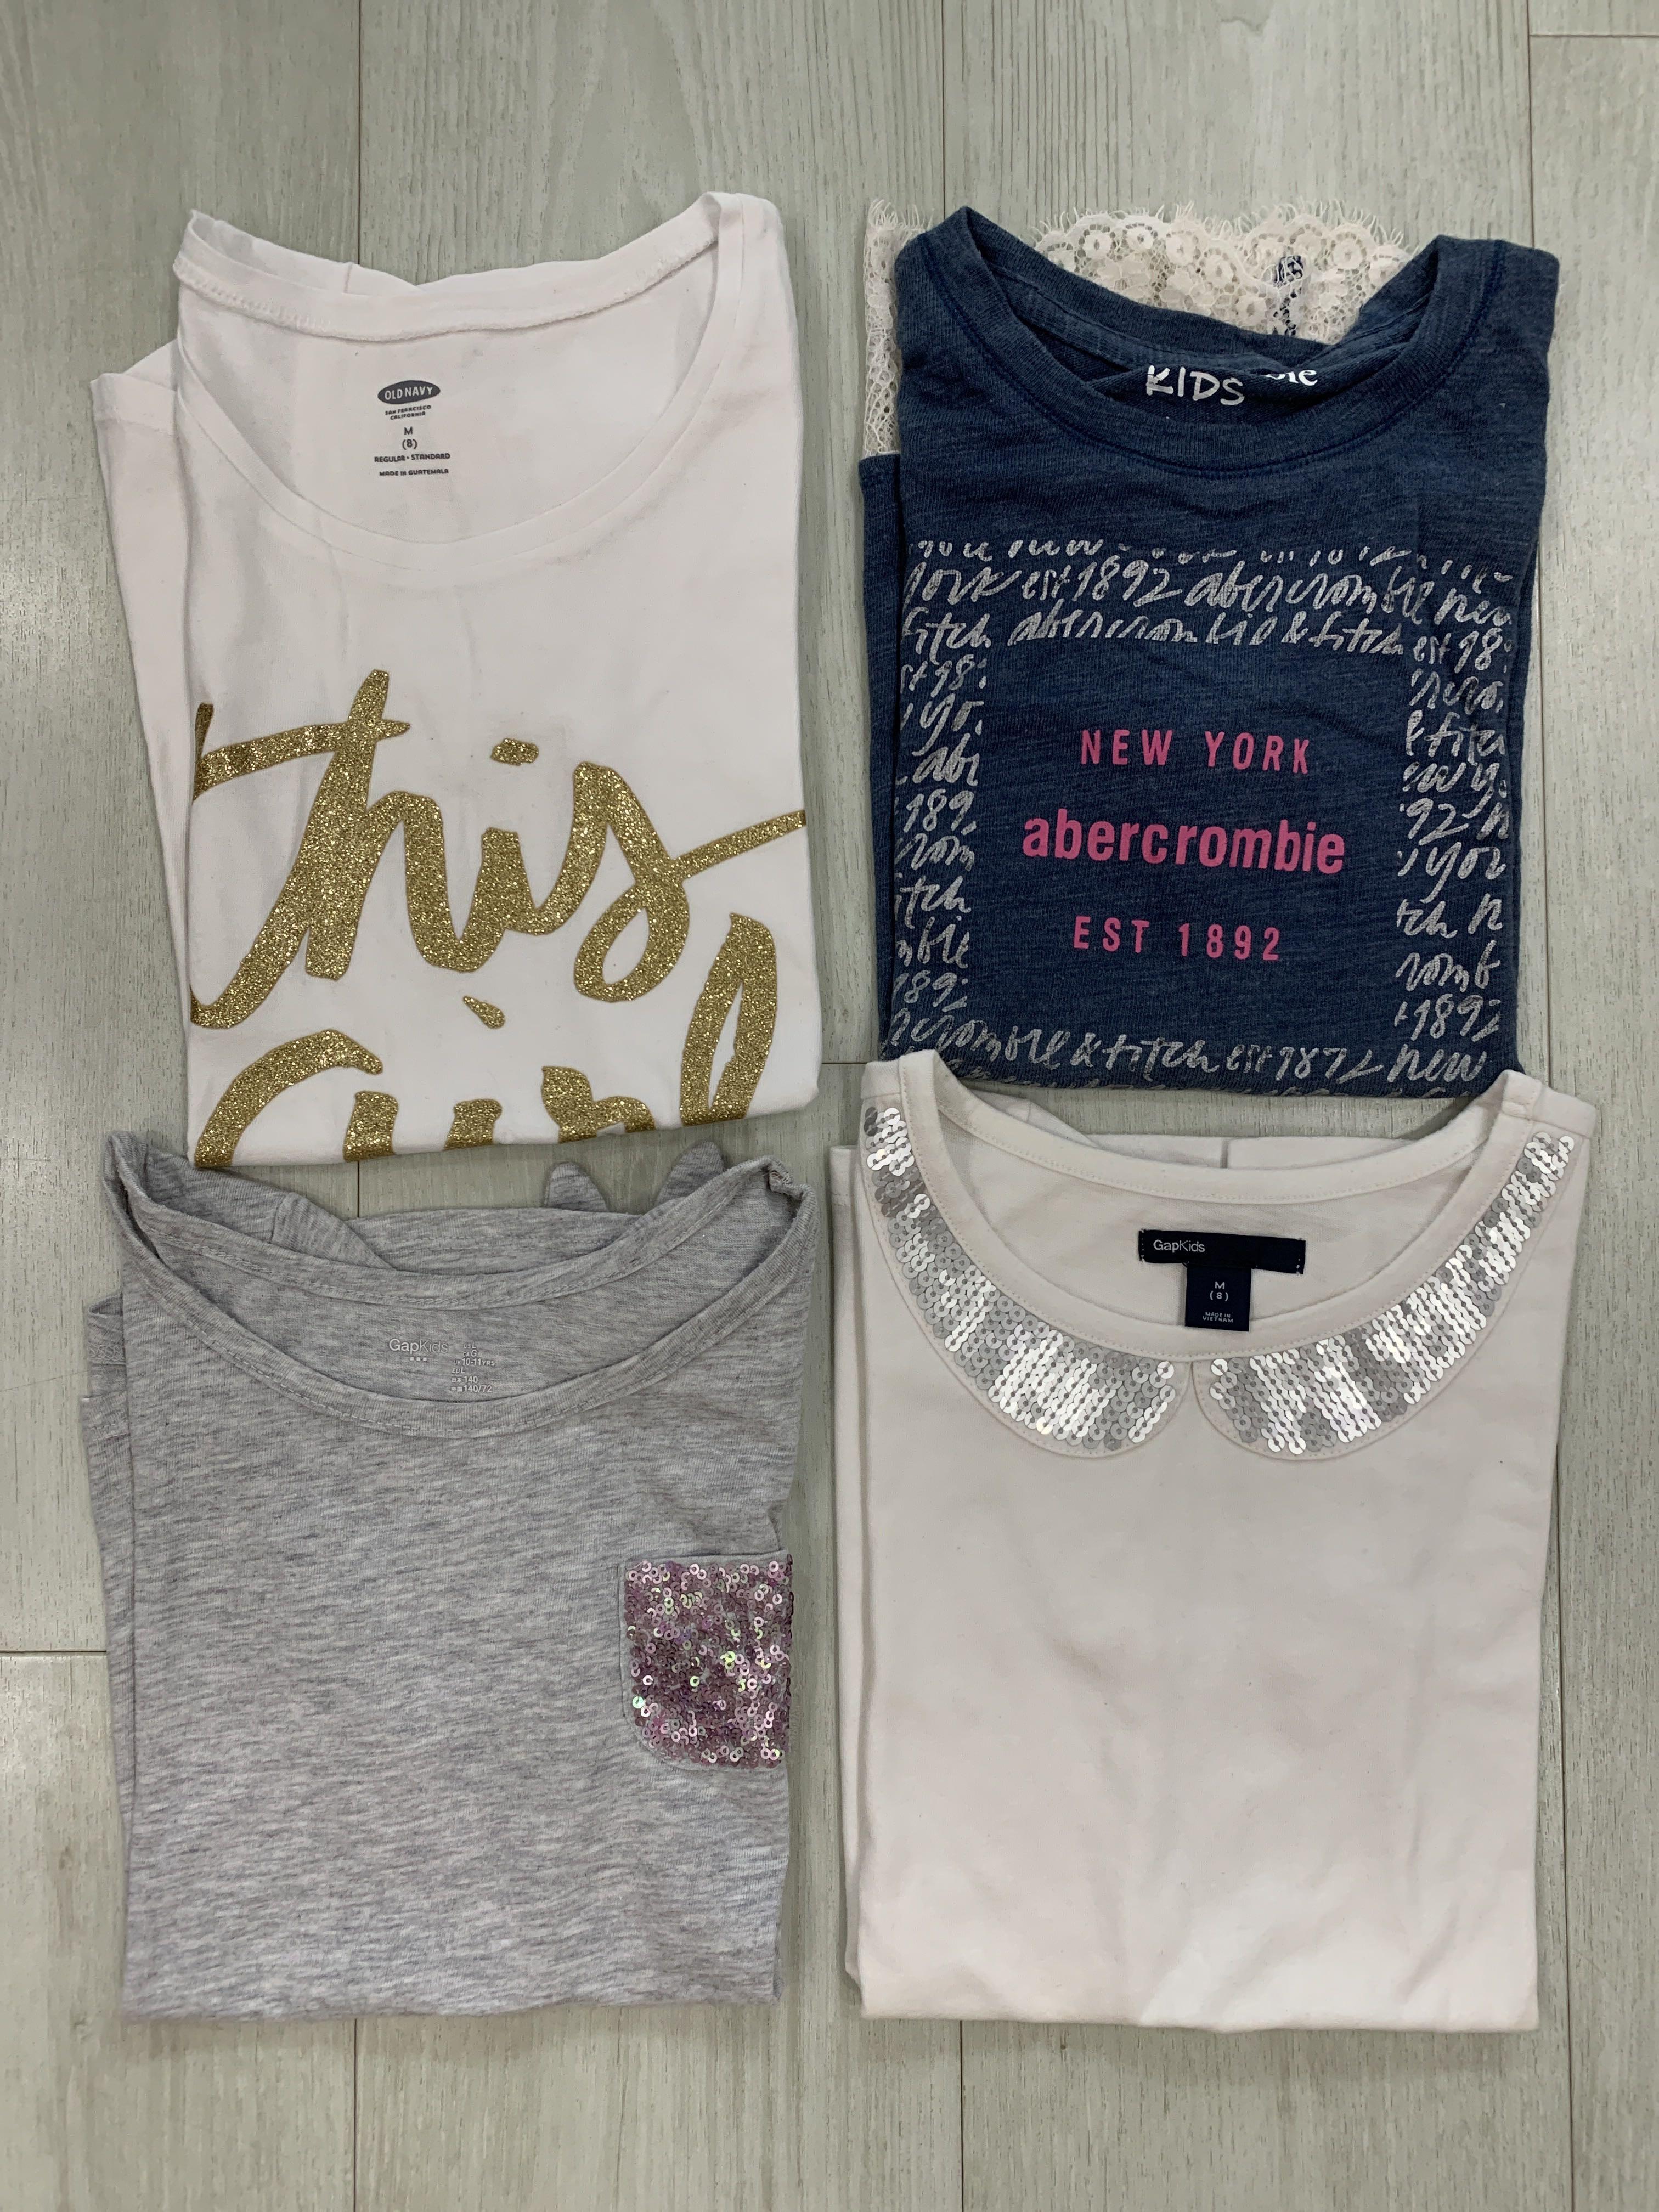 Old Navy Abercrombie and Fitch Gap Girls size Medium Clothing Lot